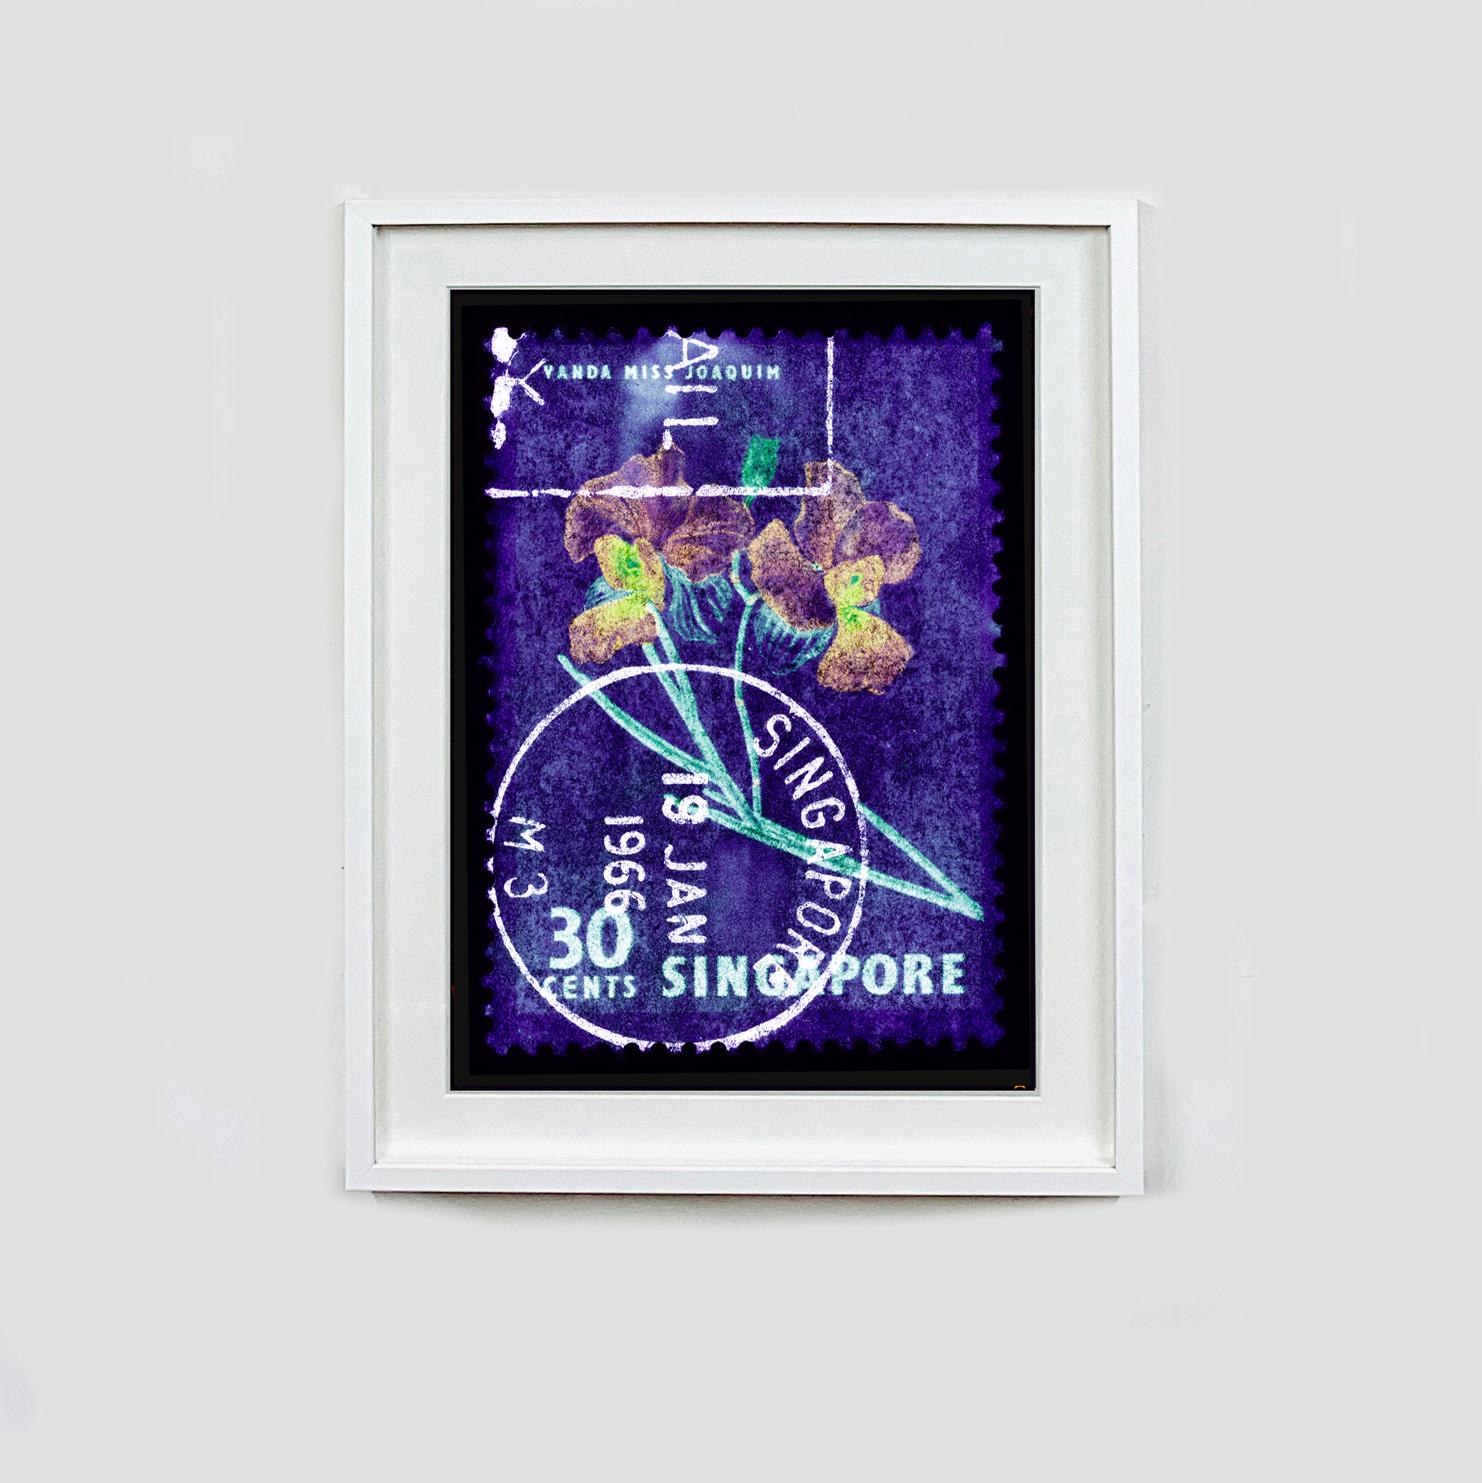 Singapore Stamp Collection, 30c Singapore Orchid Purple - Floral color photo - Conceptual Photograph by Heidler & Heeps